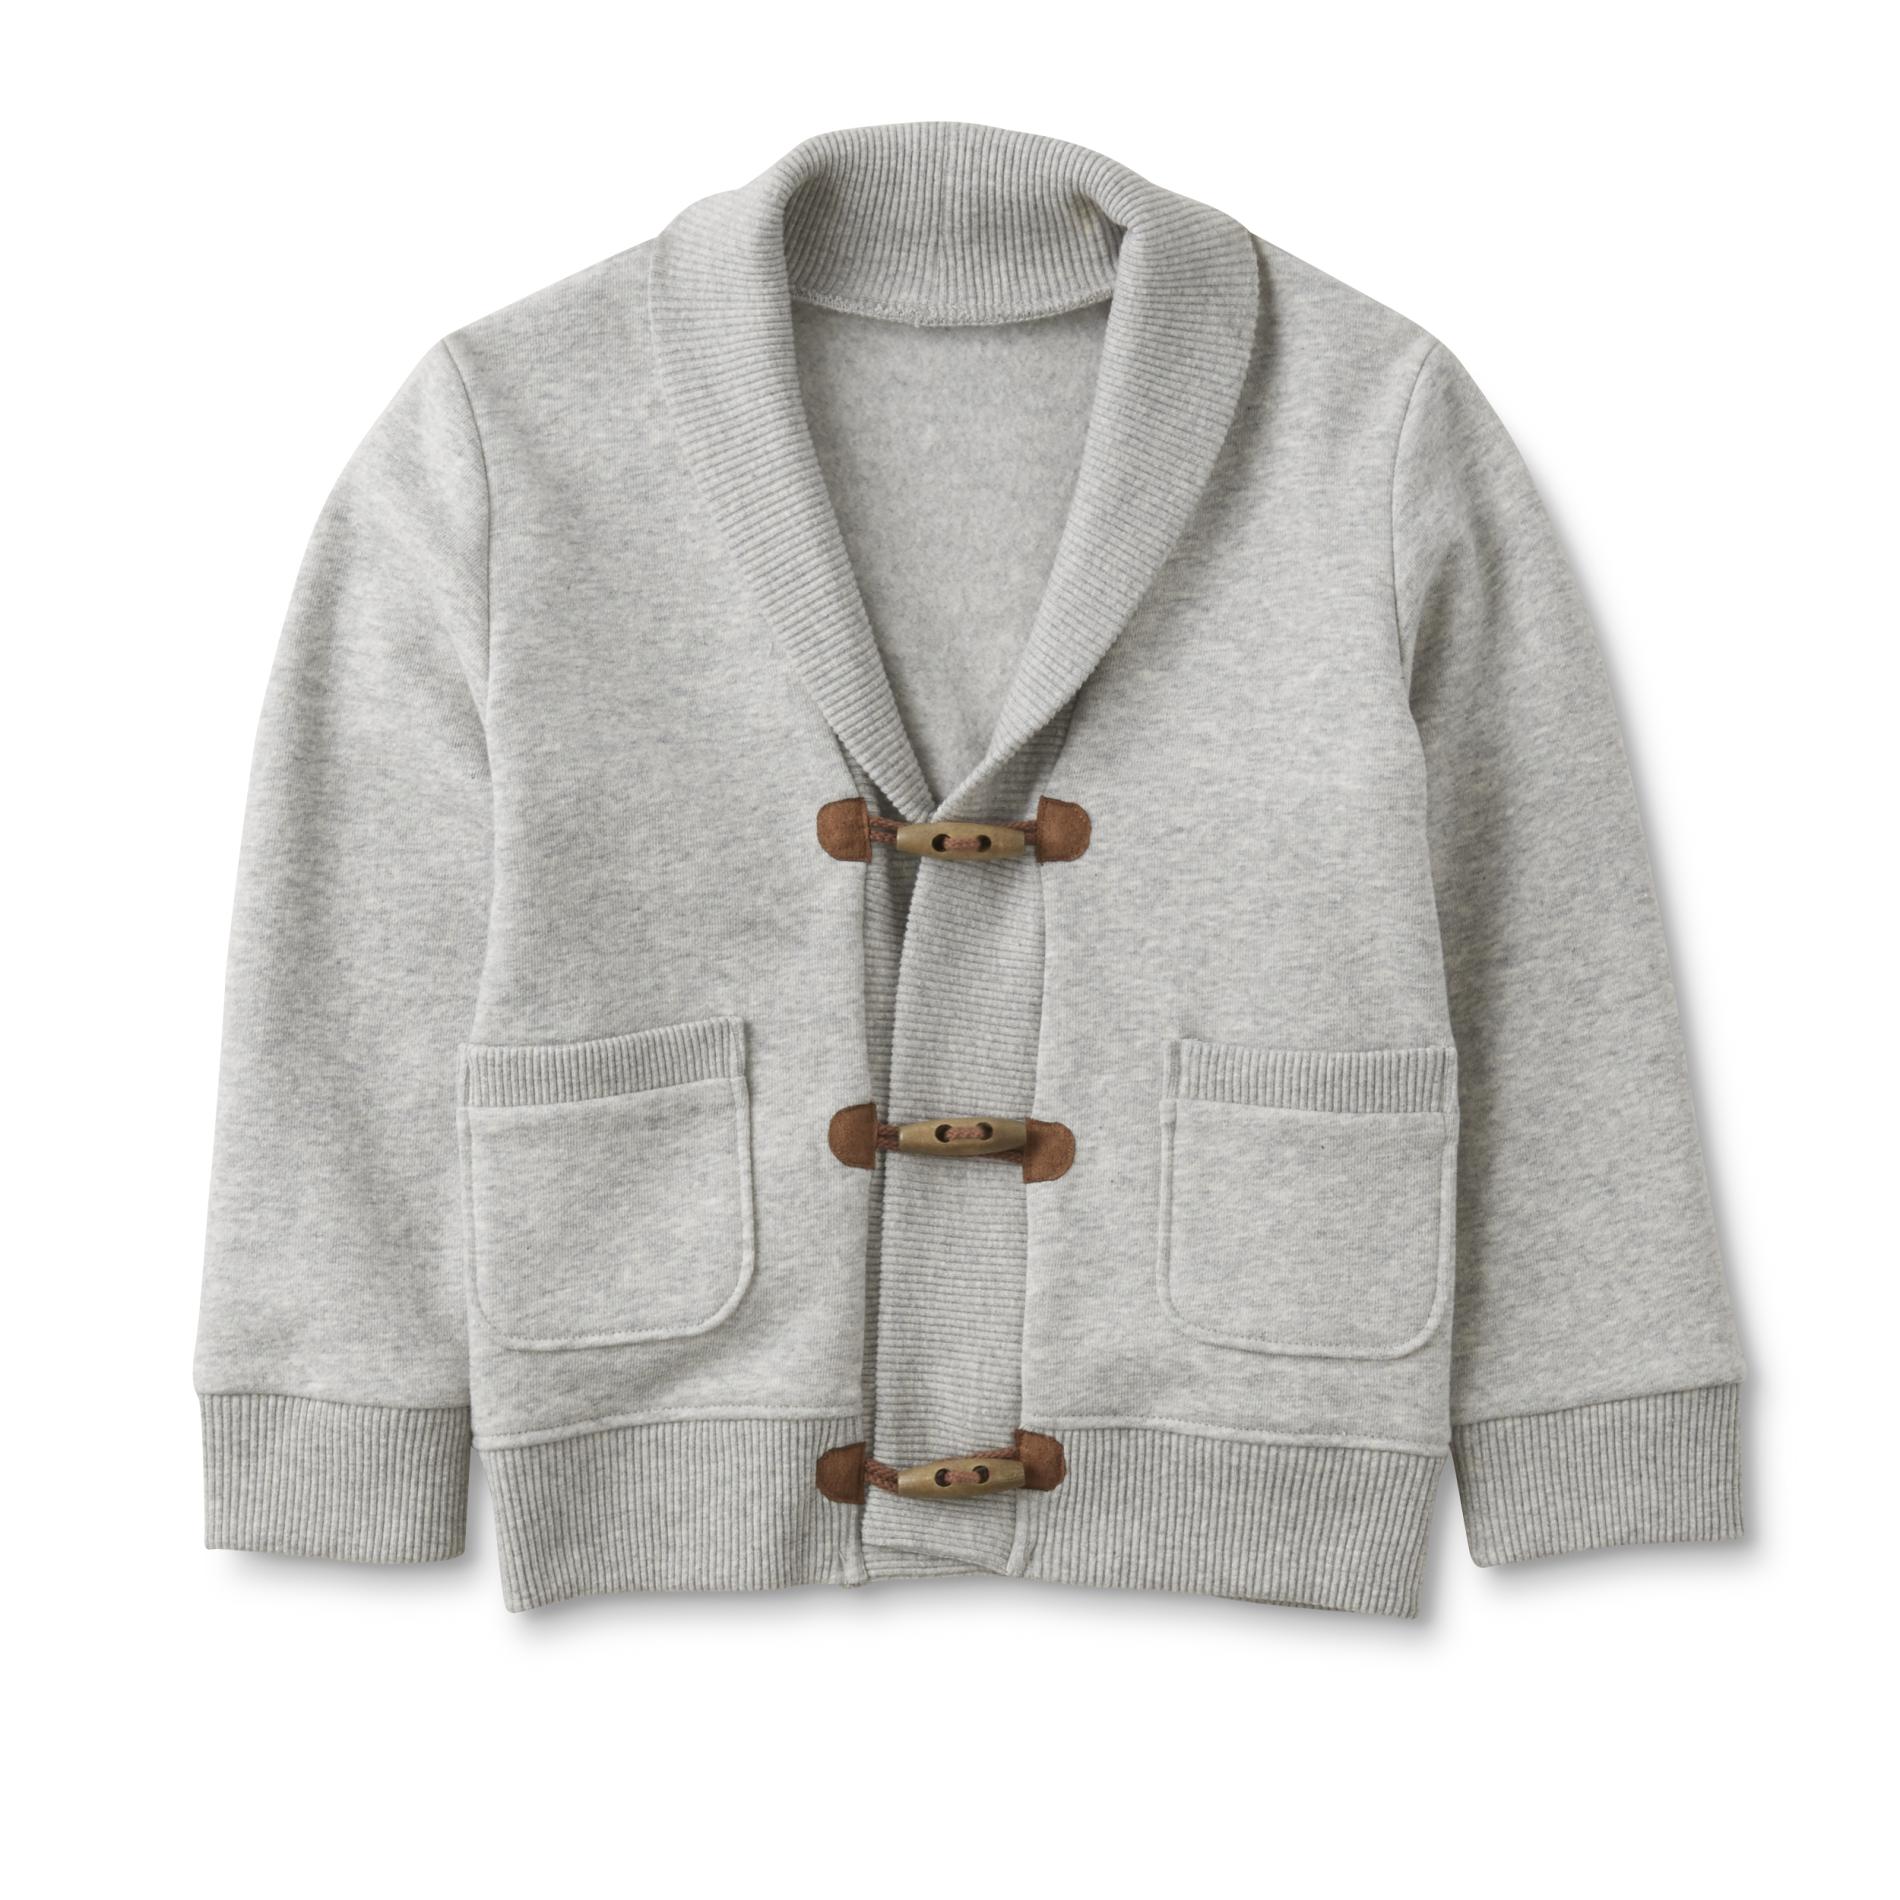 Route 66 Infant & Toddler Boy's Toggle Cardigan